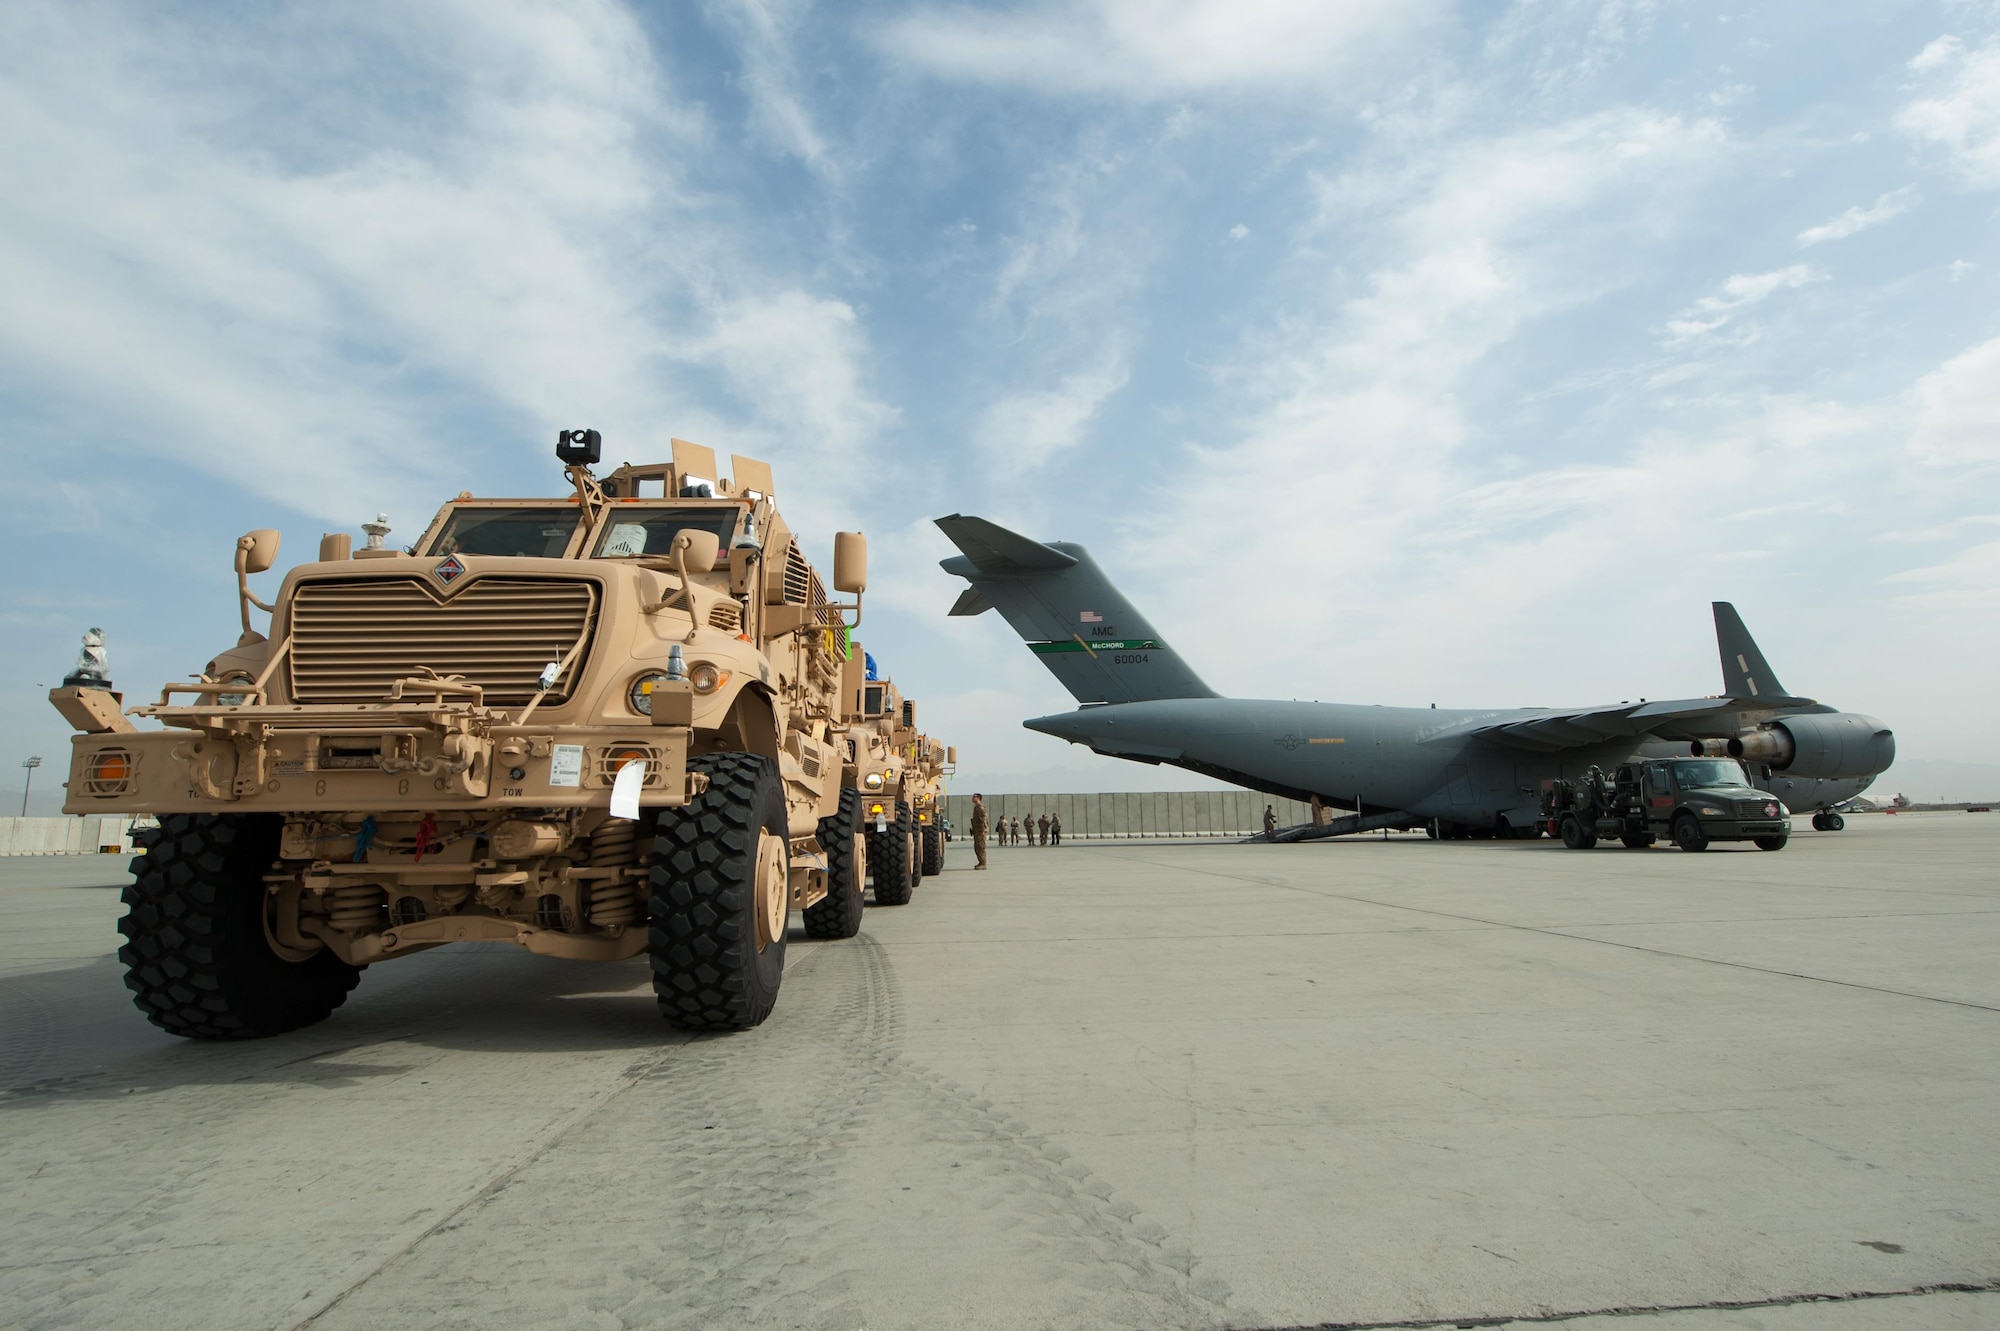 U.S. Army Mine-Resistant Ambush Protected vehicles are offloaded from an Air Force C-17 Globemaster III aircraft at Bagram Airfield, Afghanistan, Sept. 21, 2015. USAF cargo aircraft have transported 31,500 short tons of cargo throughout Afghanistan this year (U.S. Air Force photo by Tech. Sgt. Joseph Swafford/Released)